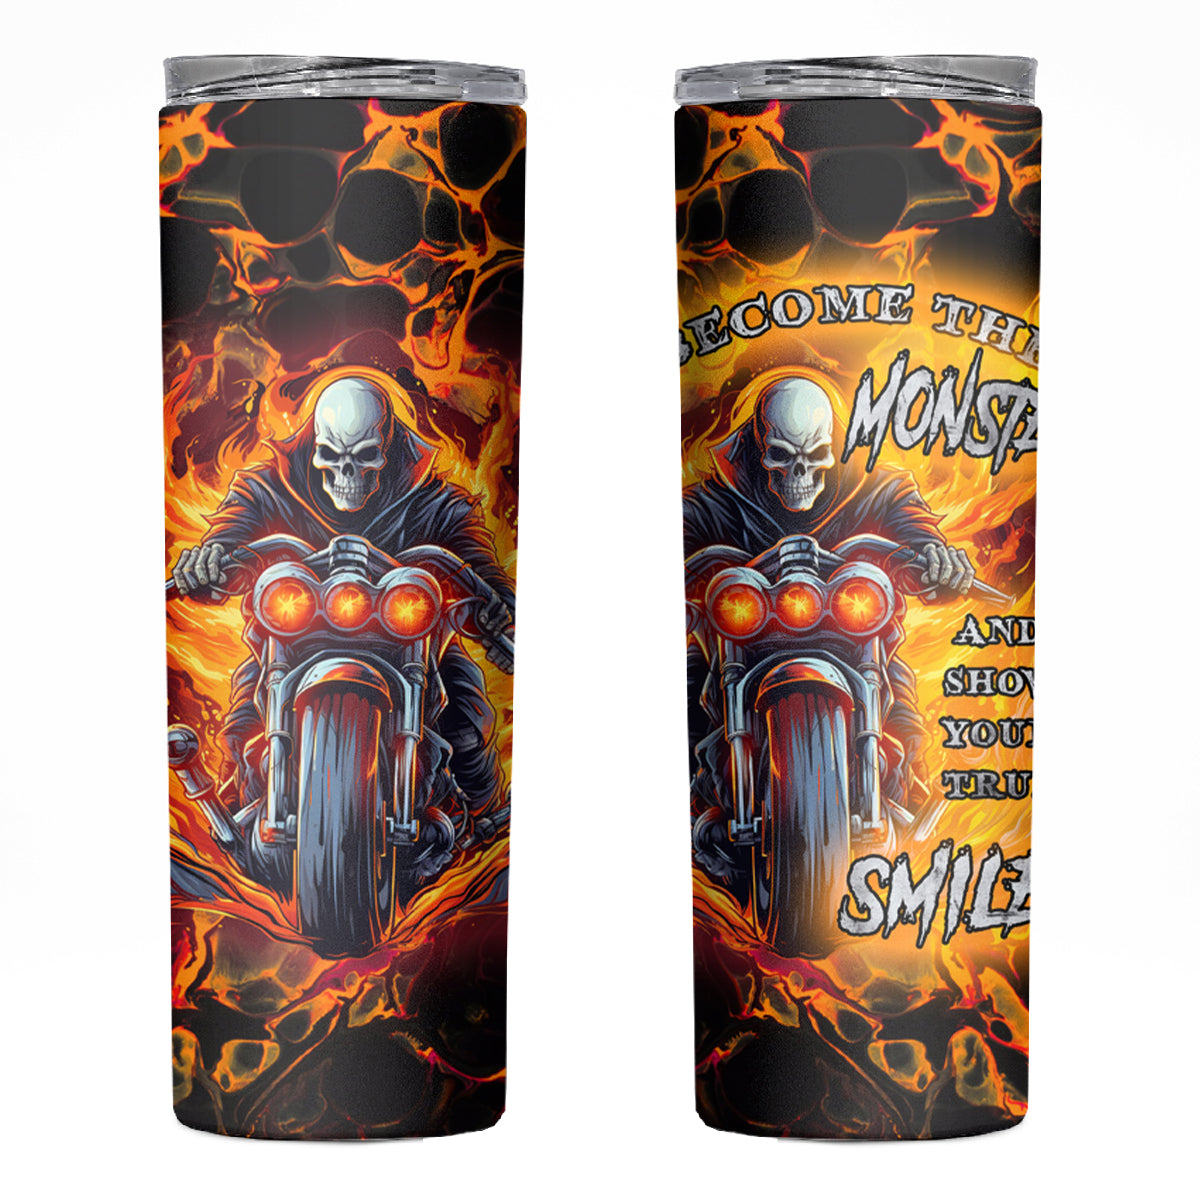 Be Come The Monster And Show Your True Smile Skinny Tumbler